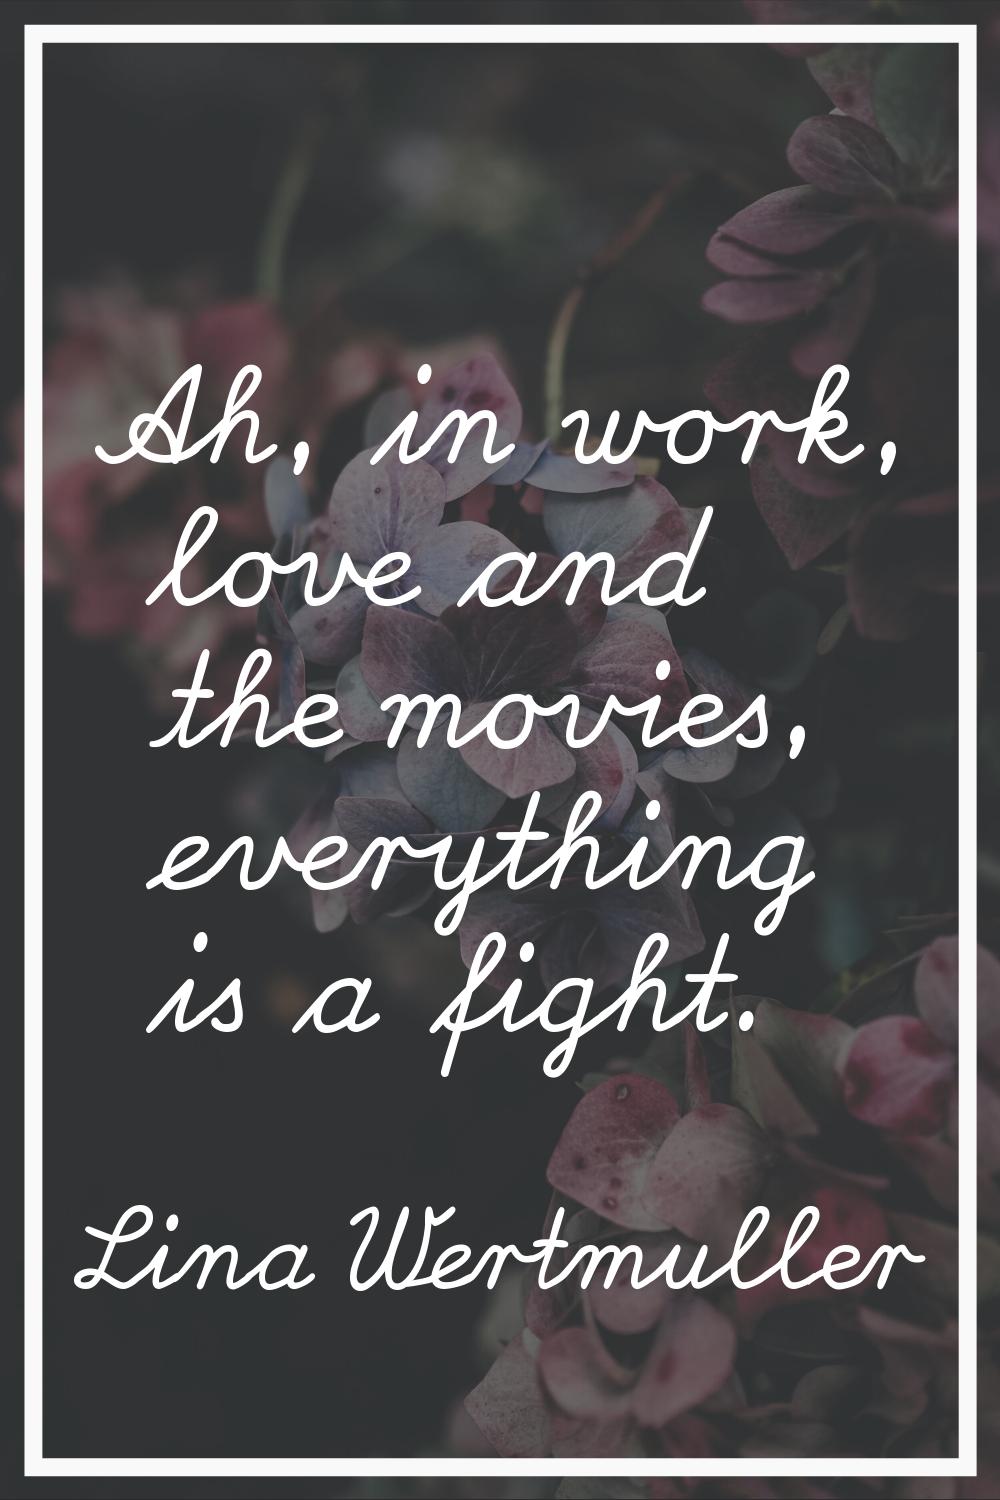 Ah, in work, love and the movies, everything is a fight.